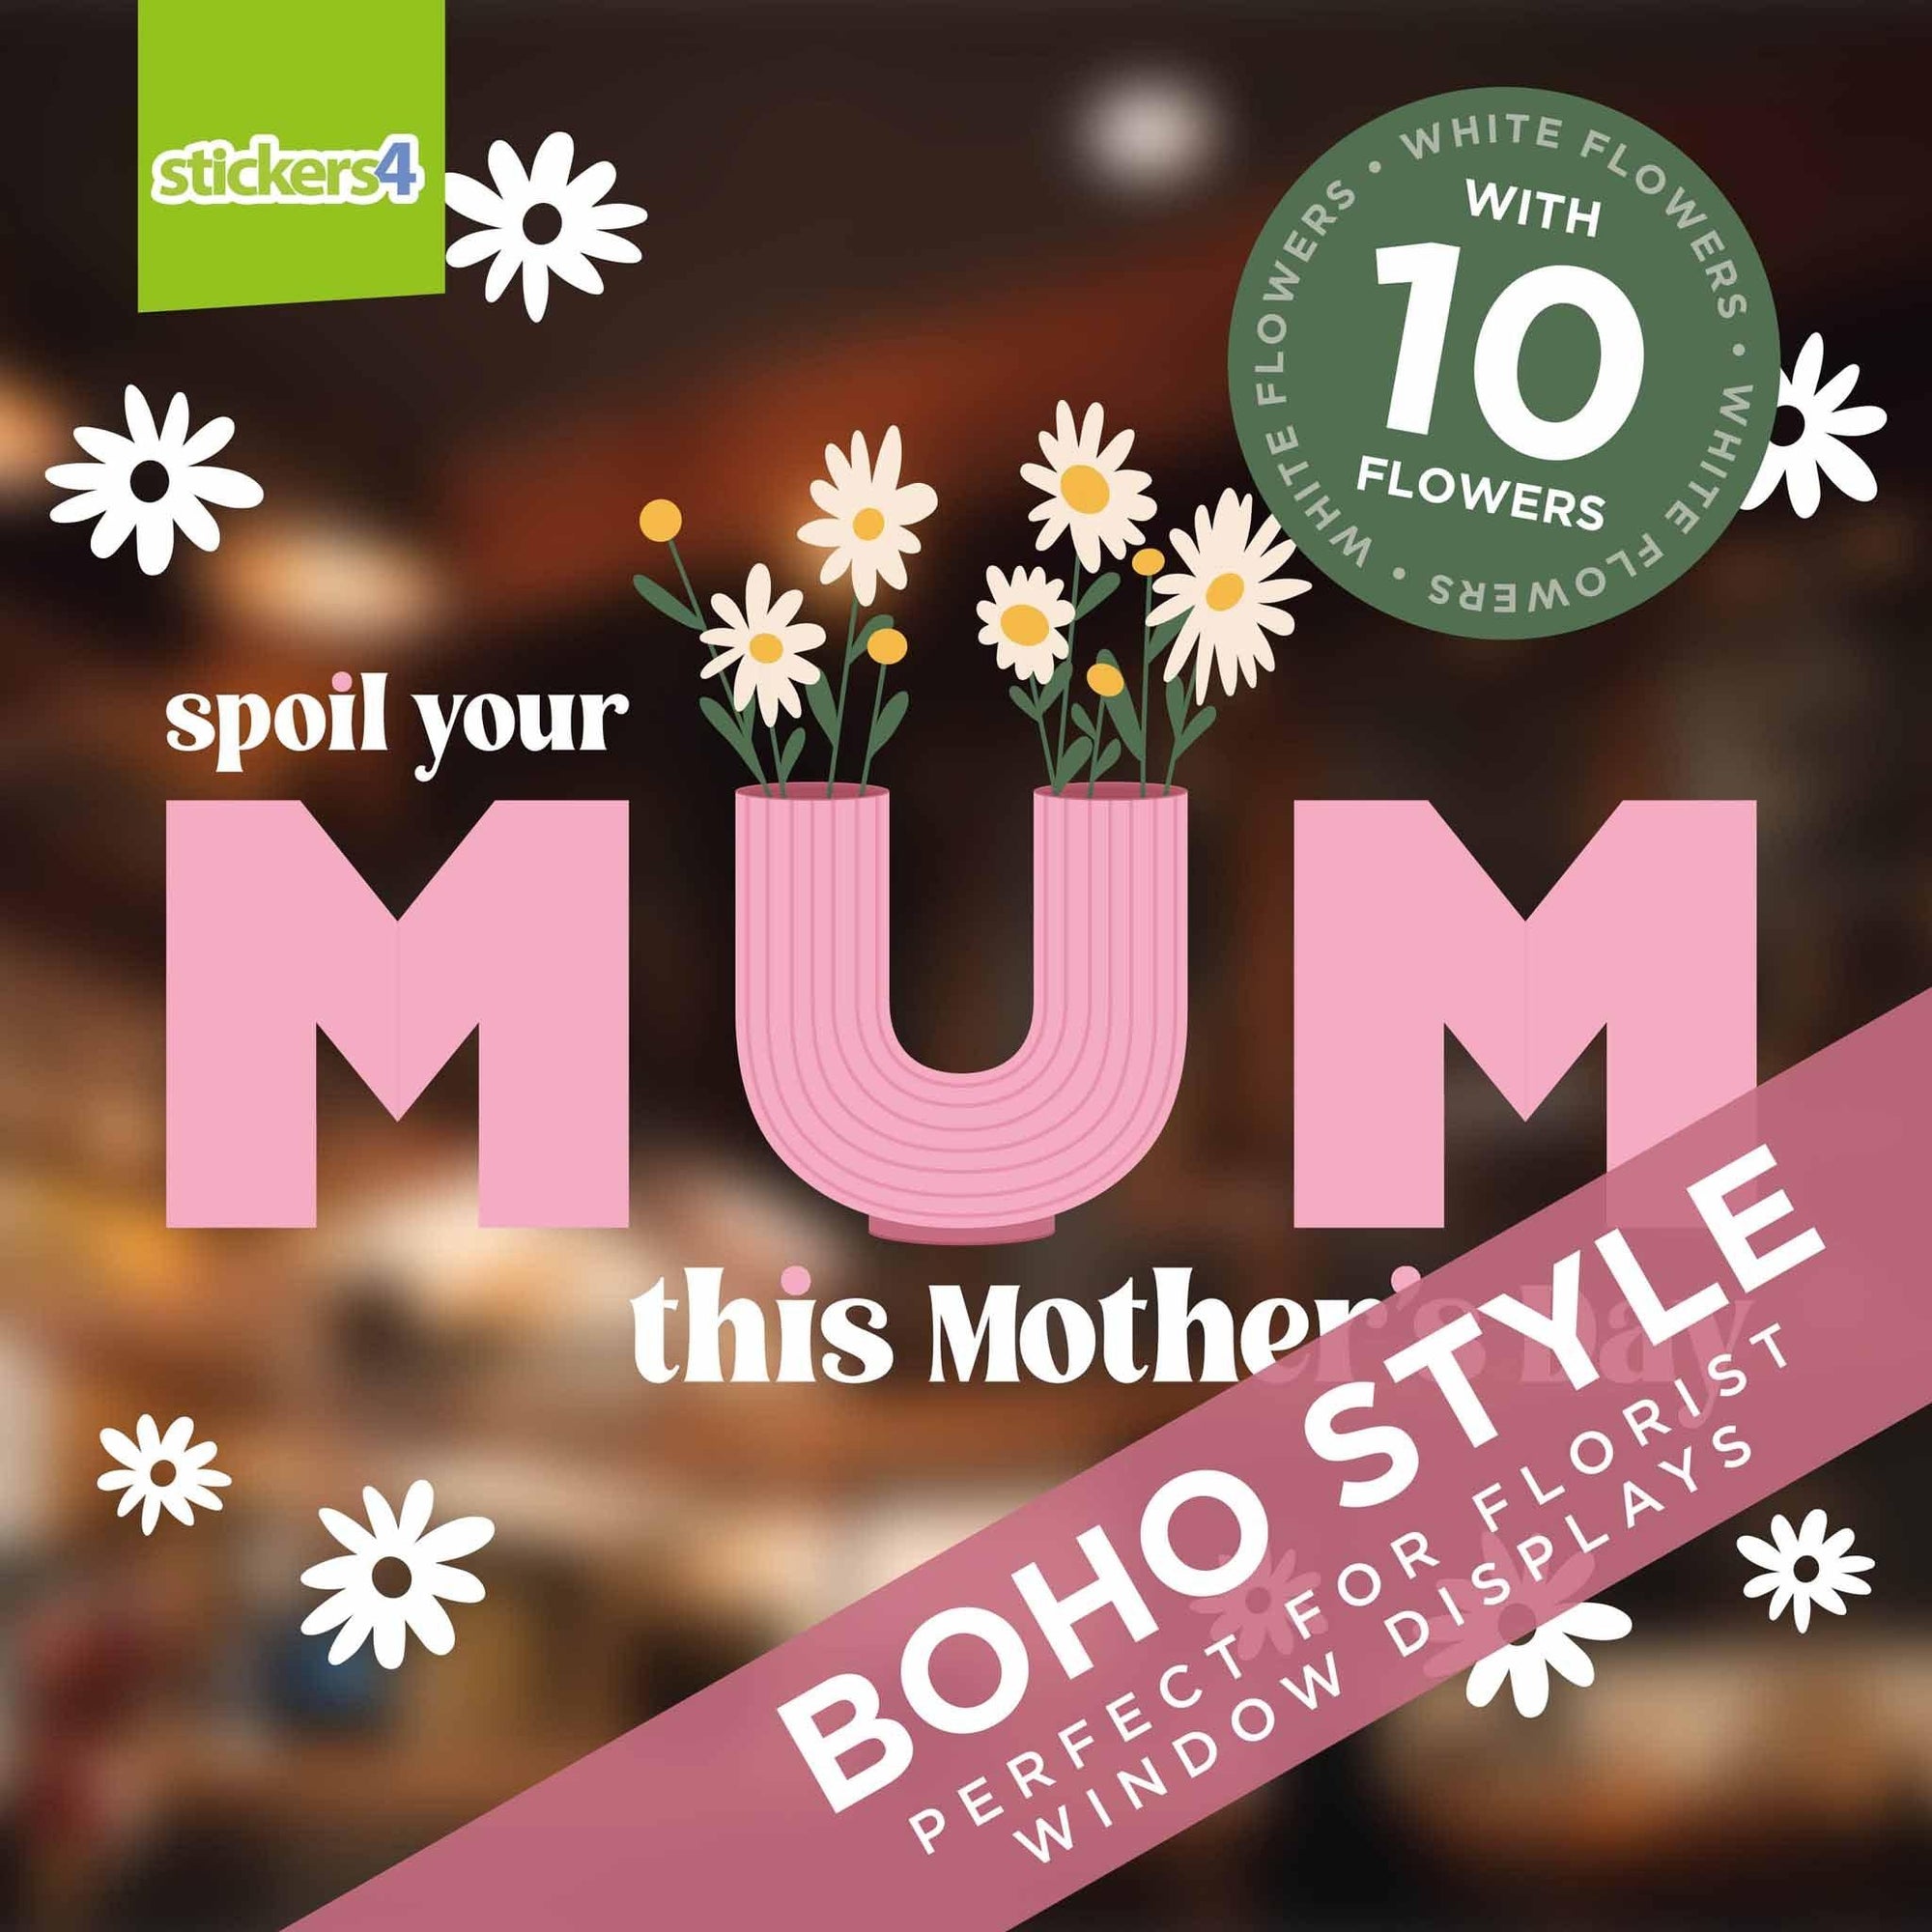 Spoil Your Mum - Boho Style Window Stickers Mother's Day Display